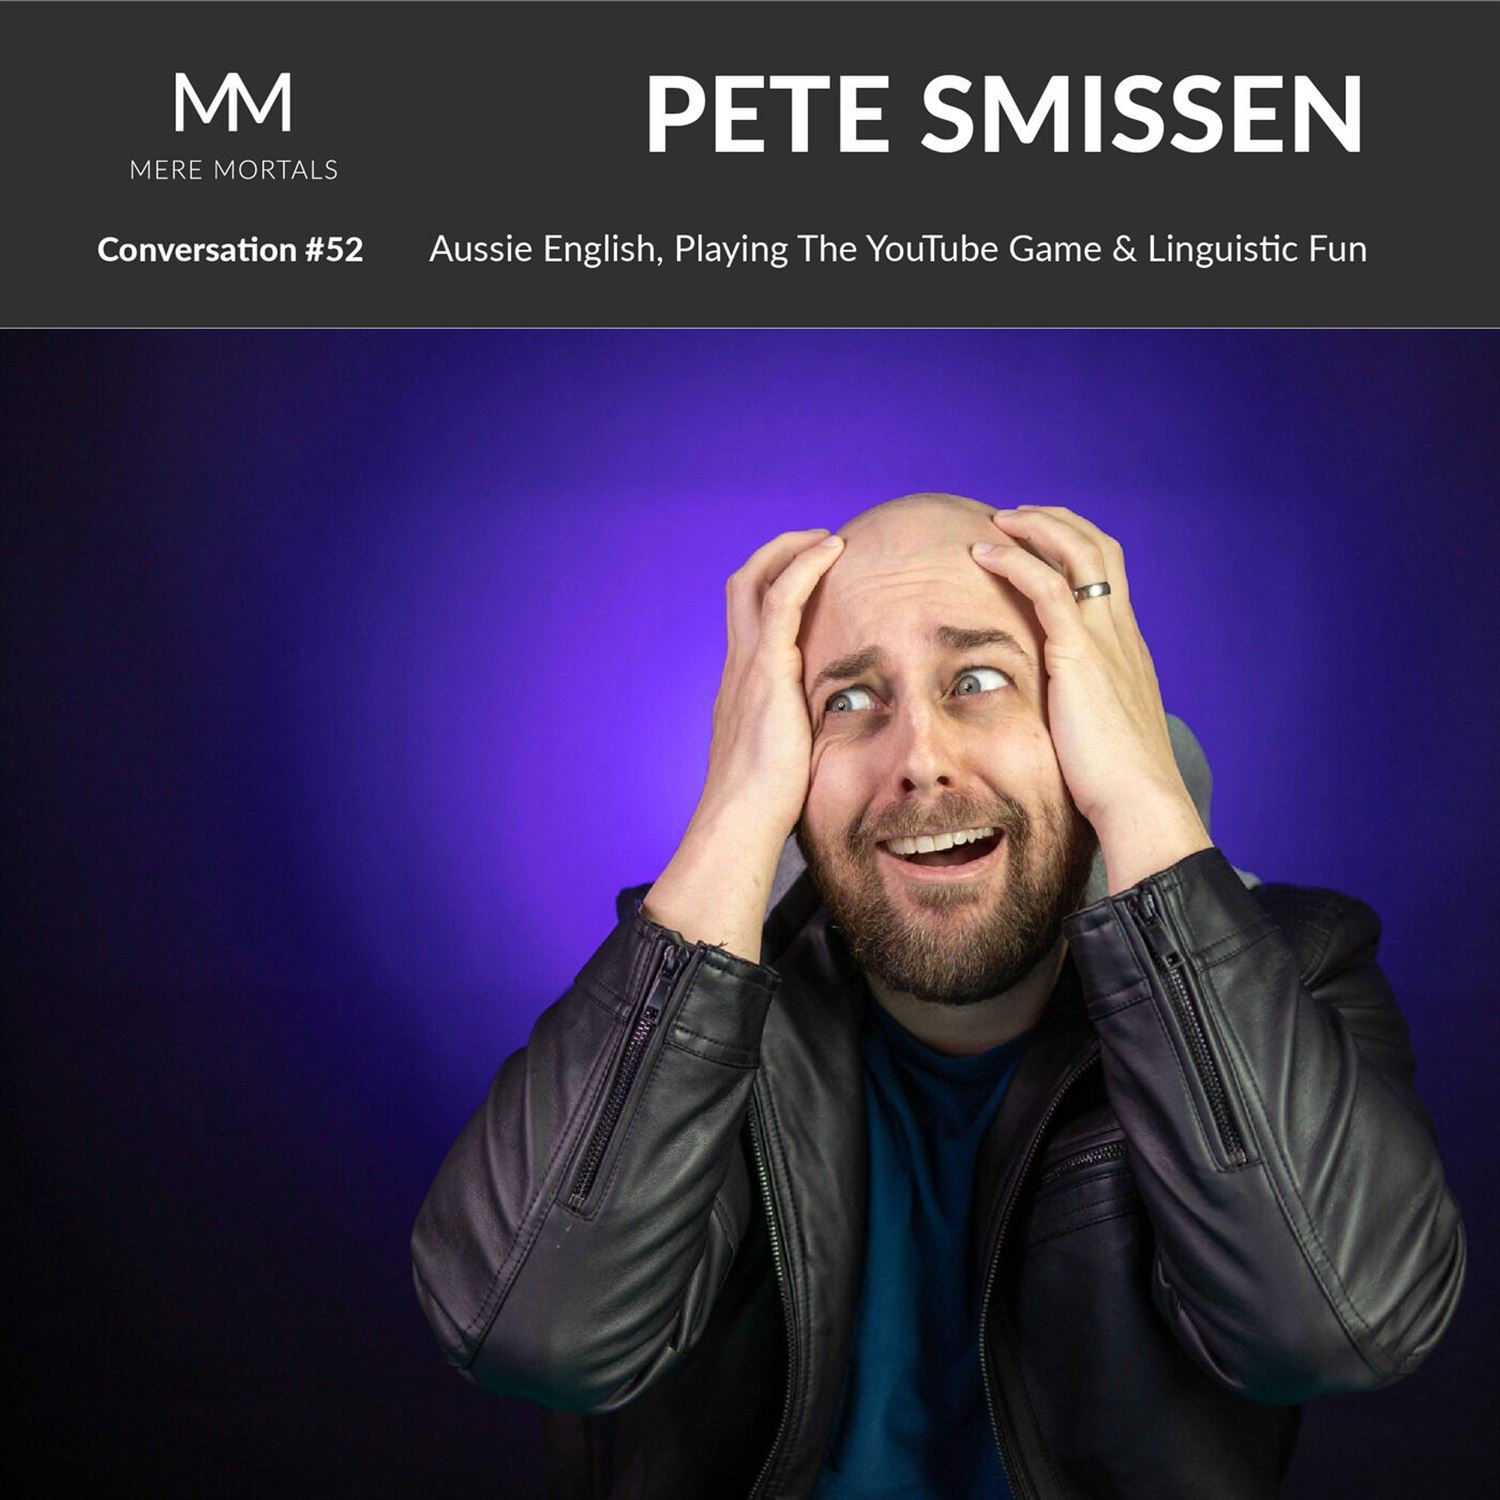 PETE SMISSEN | Aussie English, Playing The YouTube Game & Linguistic Fun